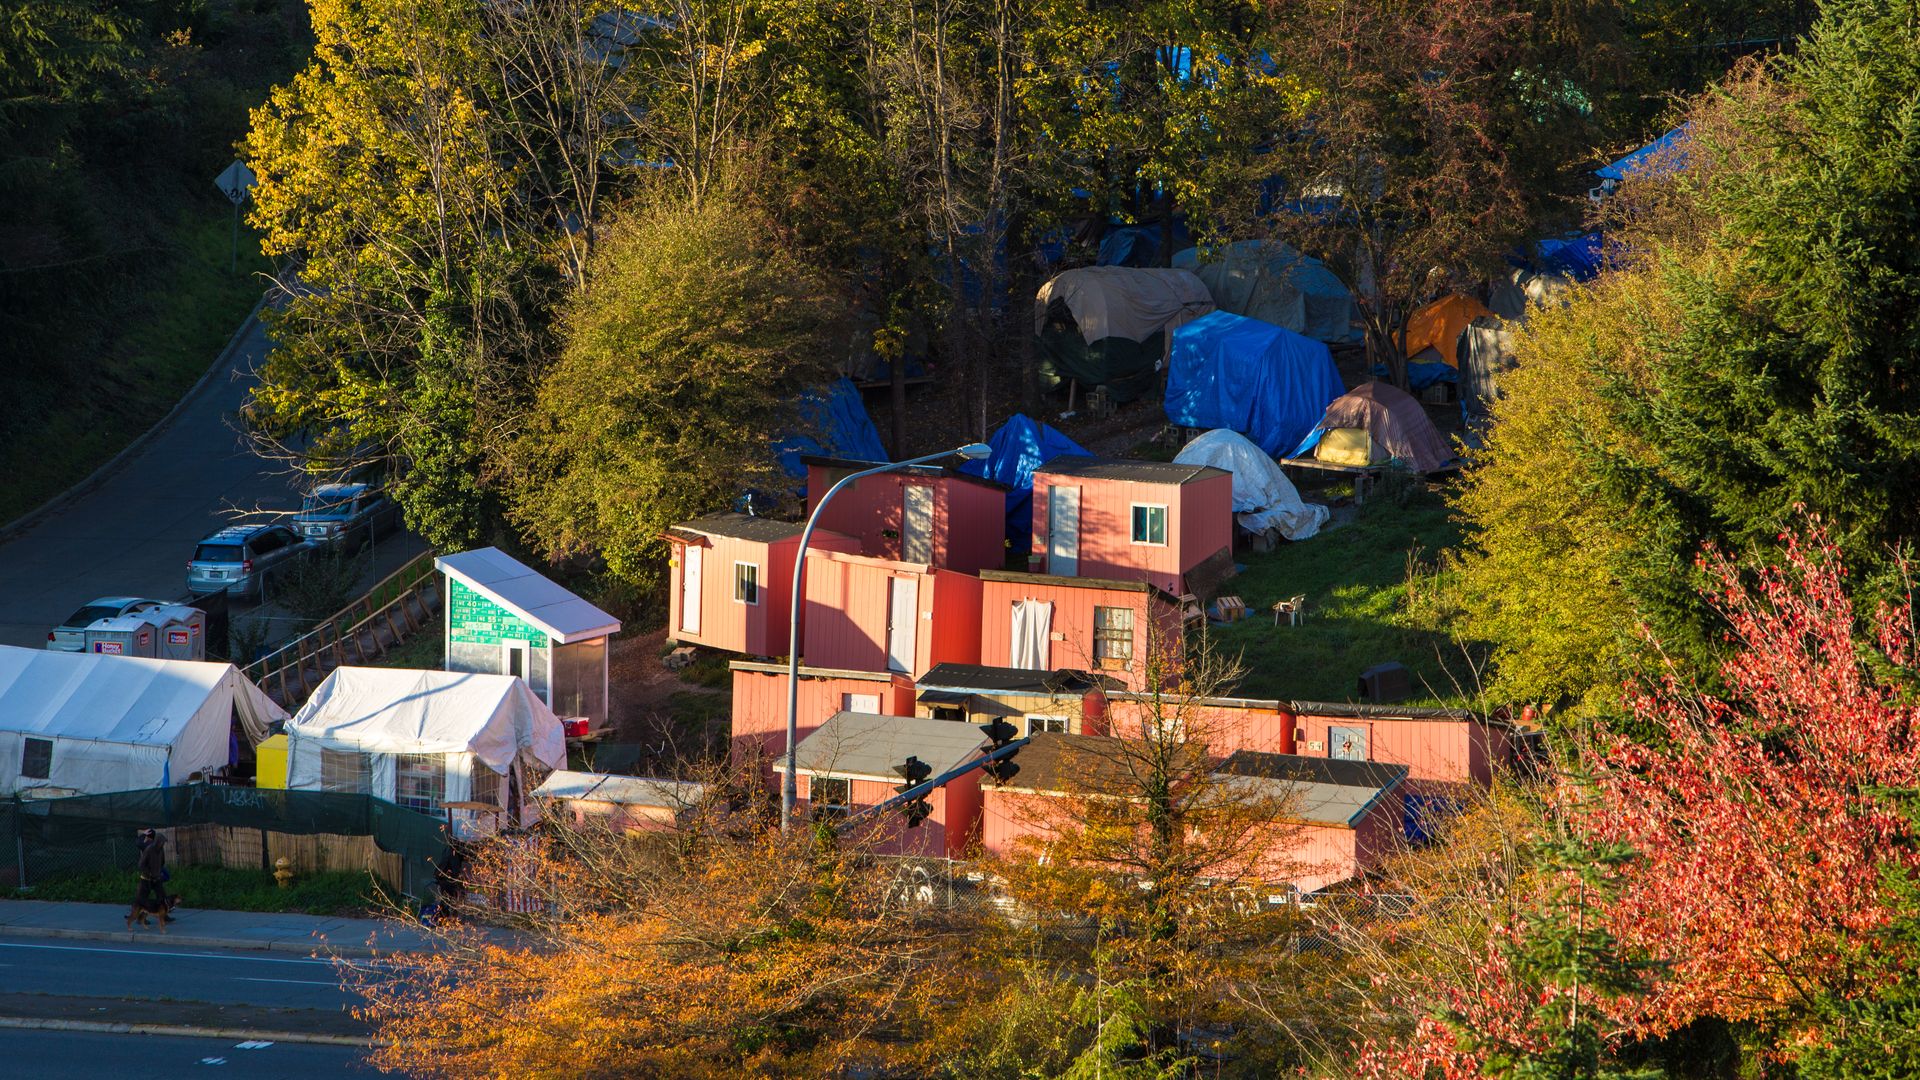  A homeless encampment known as Nickelsville, in Seattle, Washington.